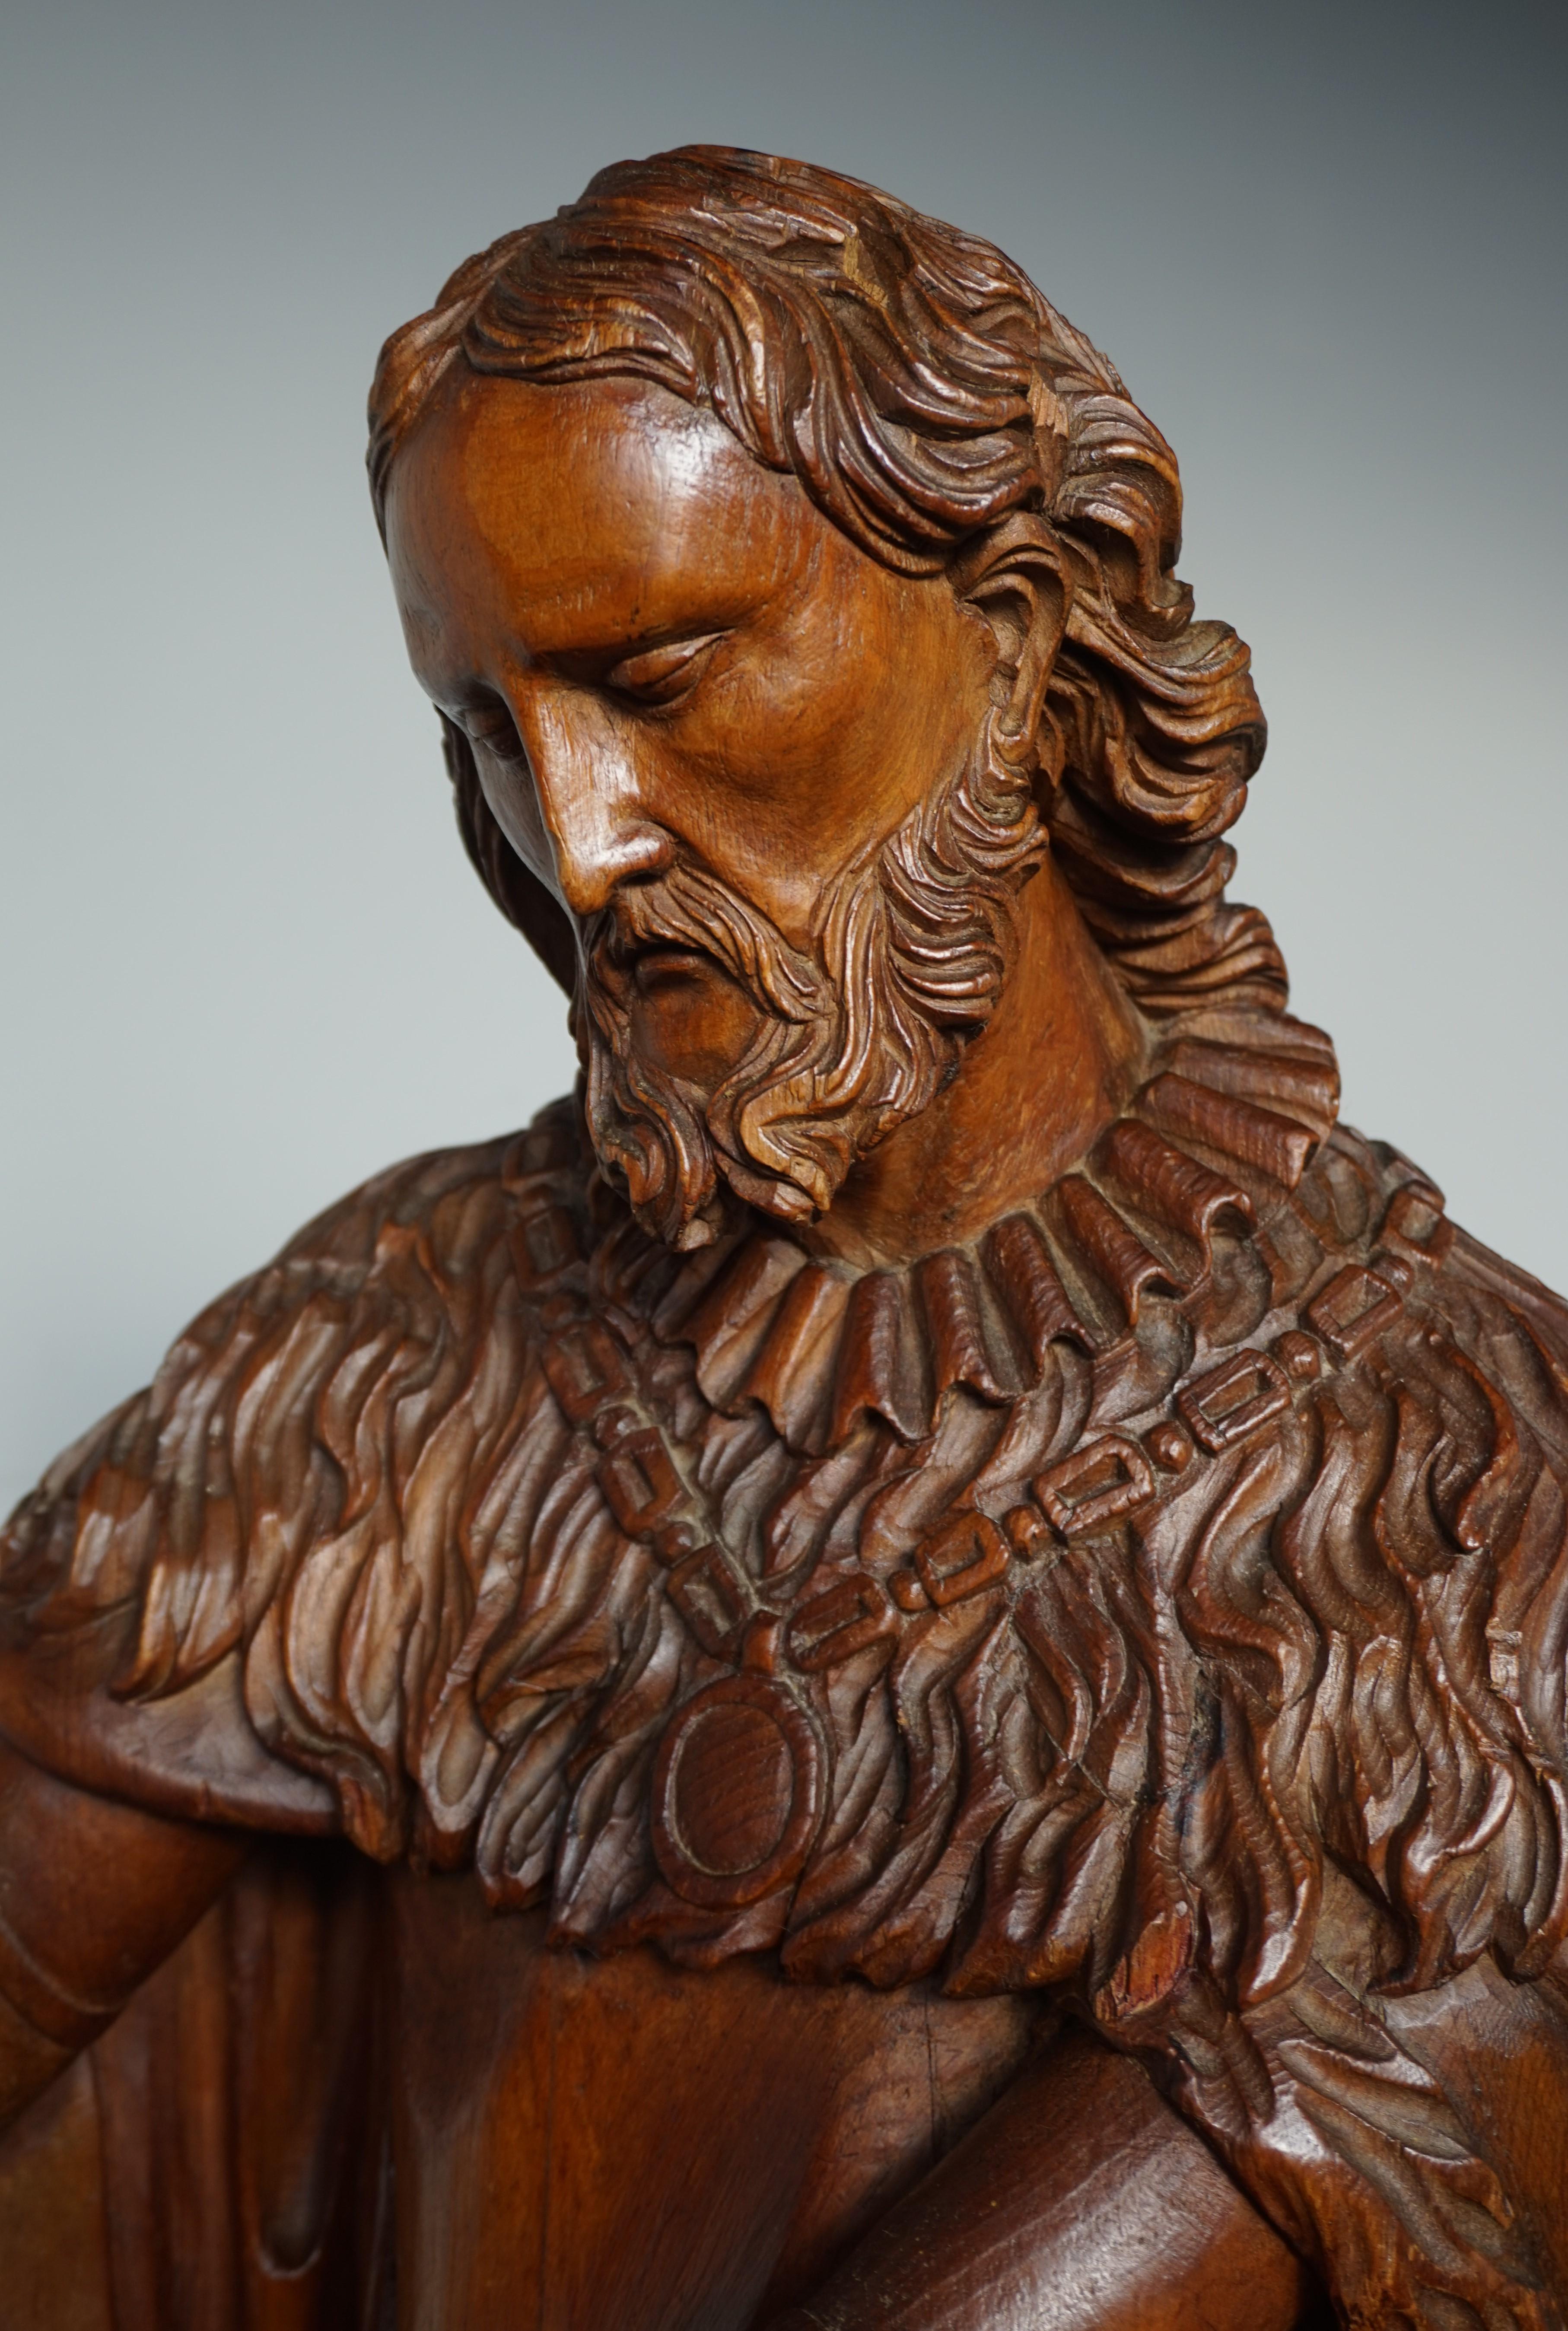 Unique hand carved church statue of Jewish prophet, John the Baptist, circa 1850.

Over the decades we have owned and sold a number of top quality carved church relics and this statue of Saint John the Baptist comes with one of the best hand carved